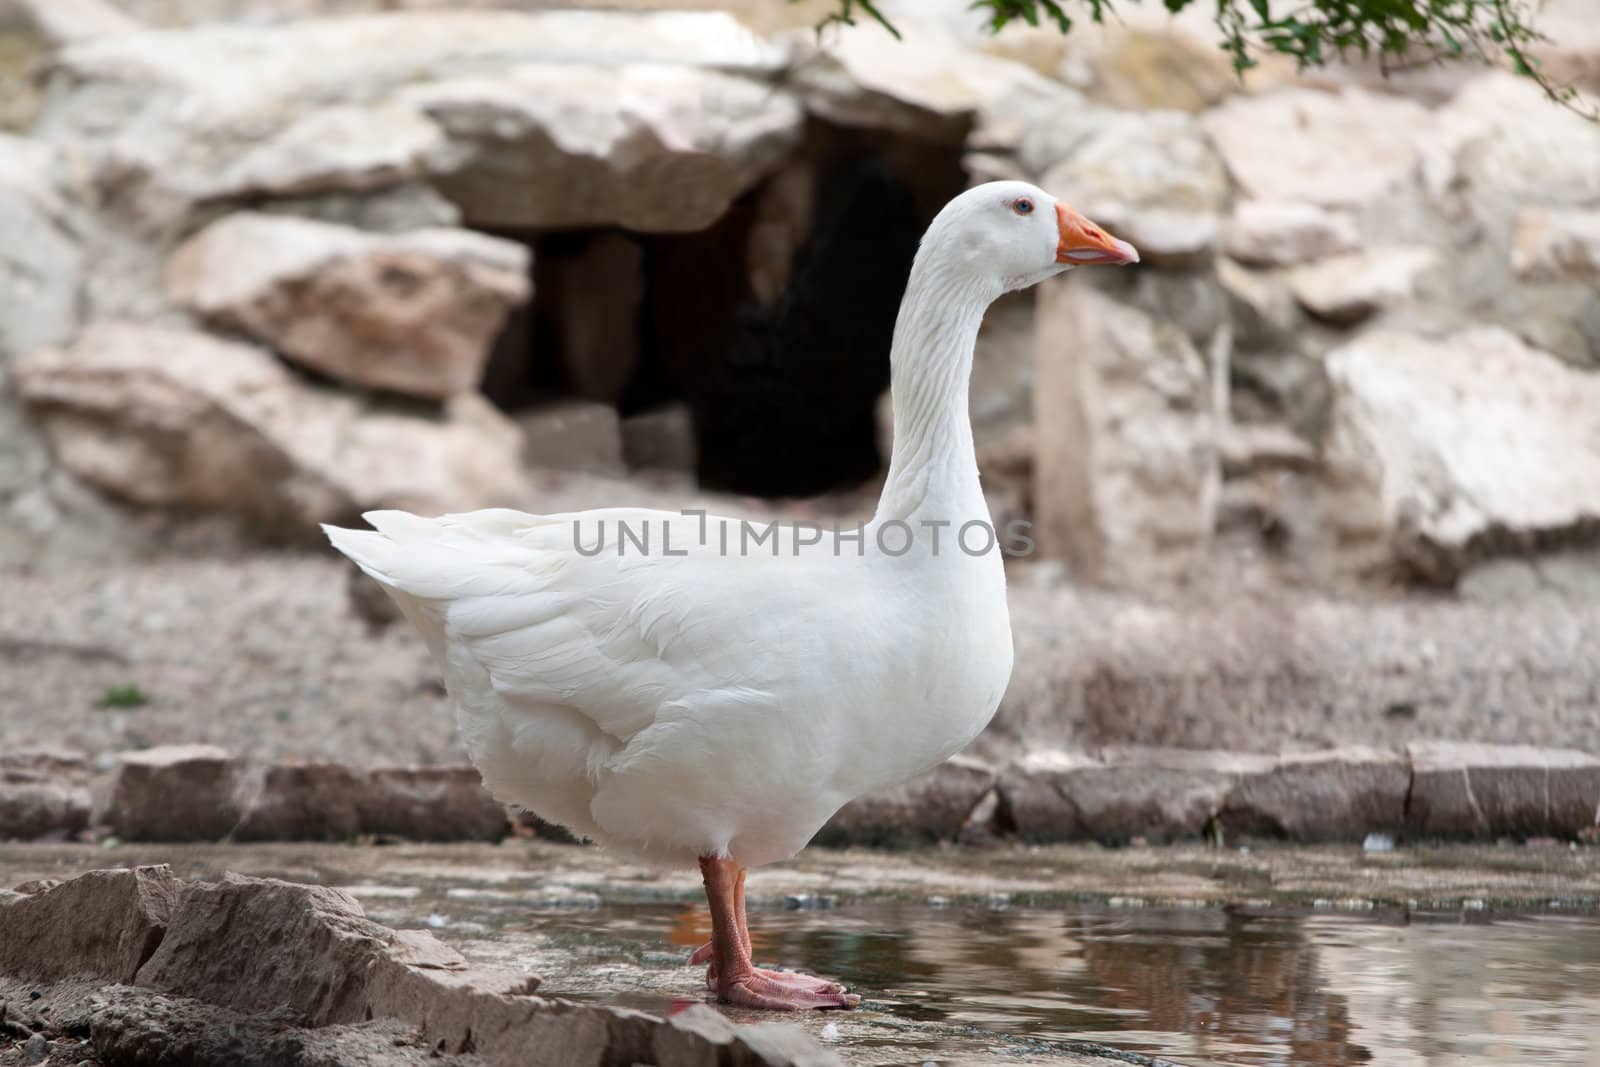 White goose or gander standing at the edge of a lake in profile.